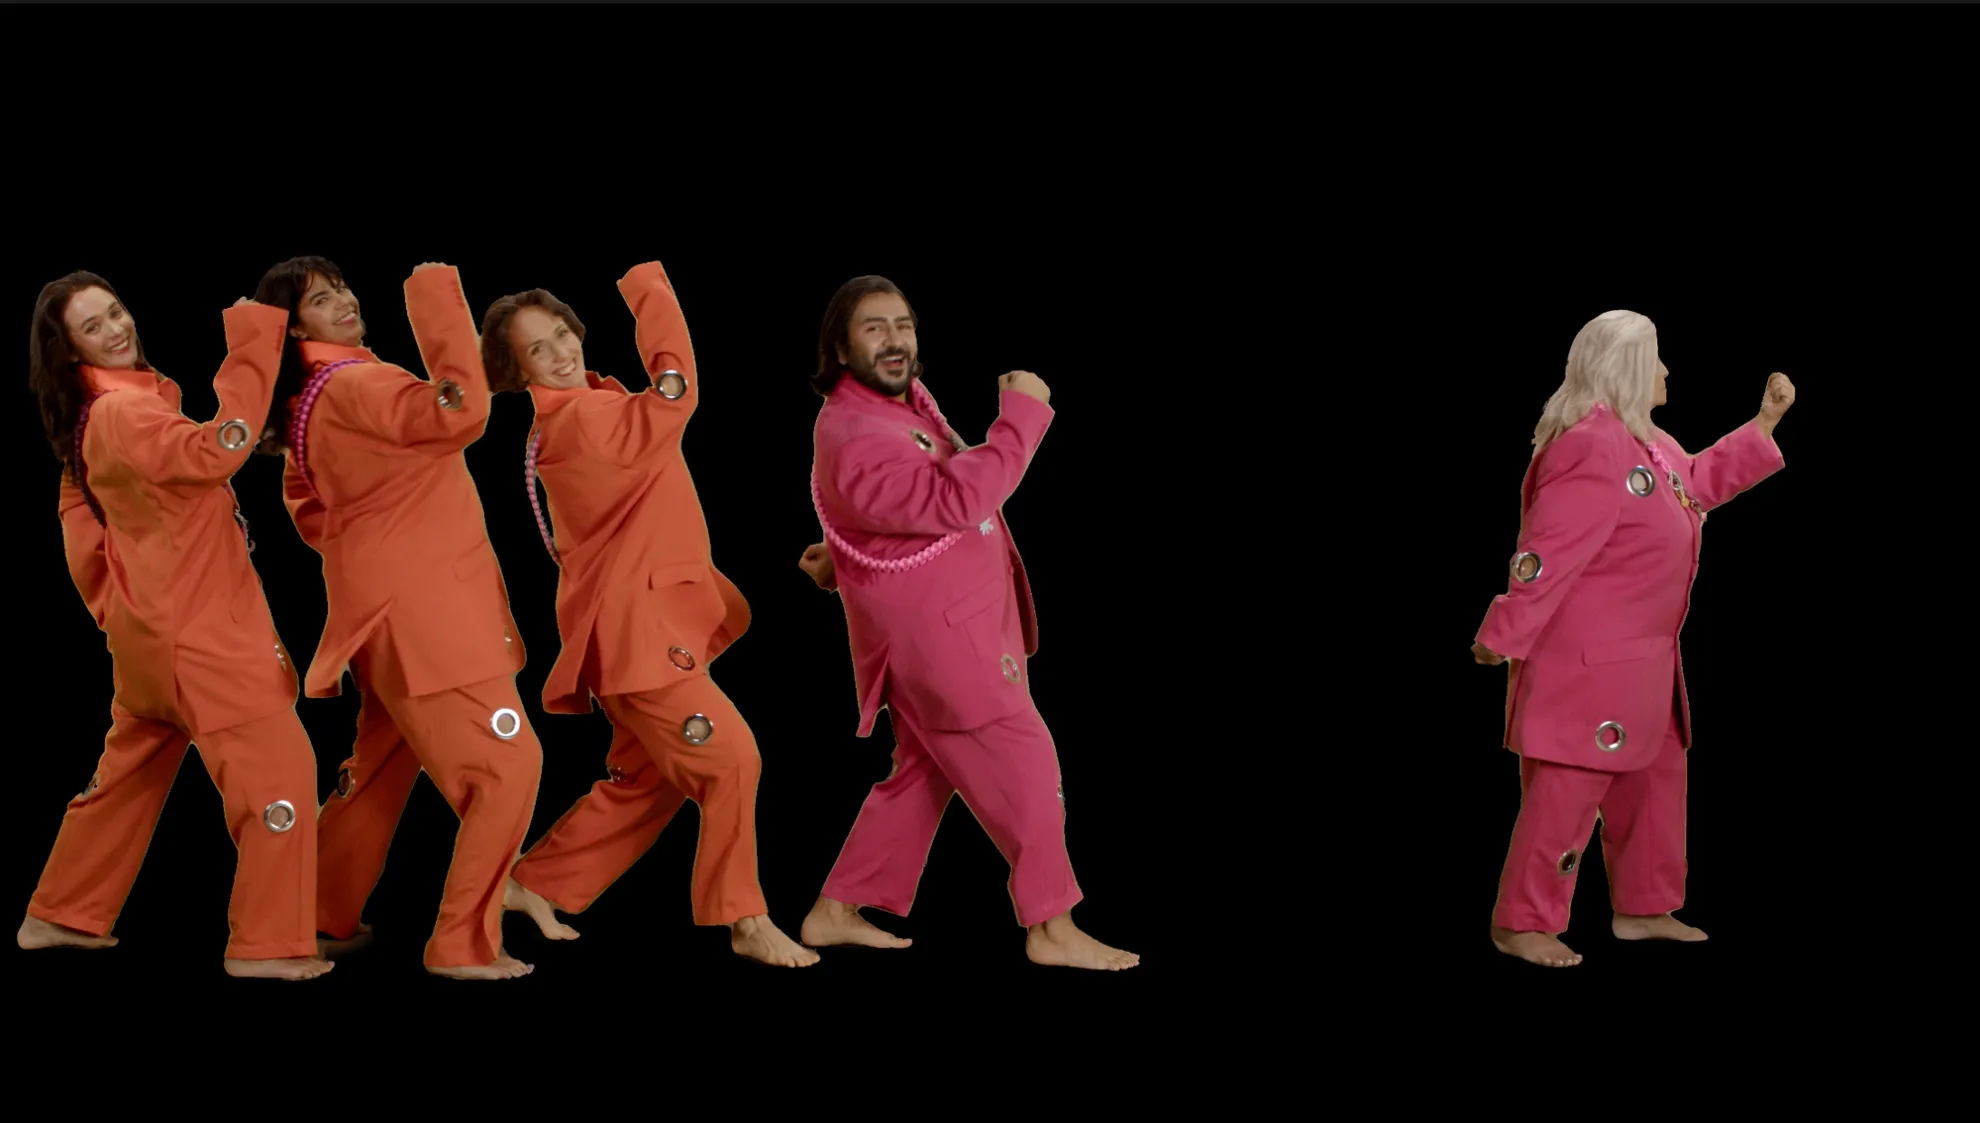 A photograph of five people in colourful suits with animated facial expressions, marching across a black background.